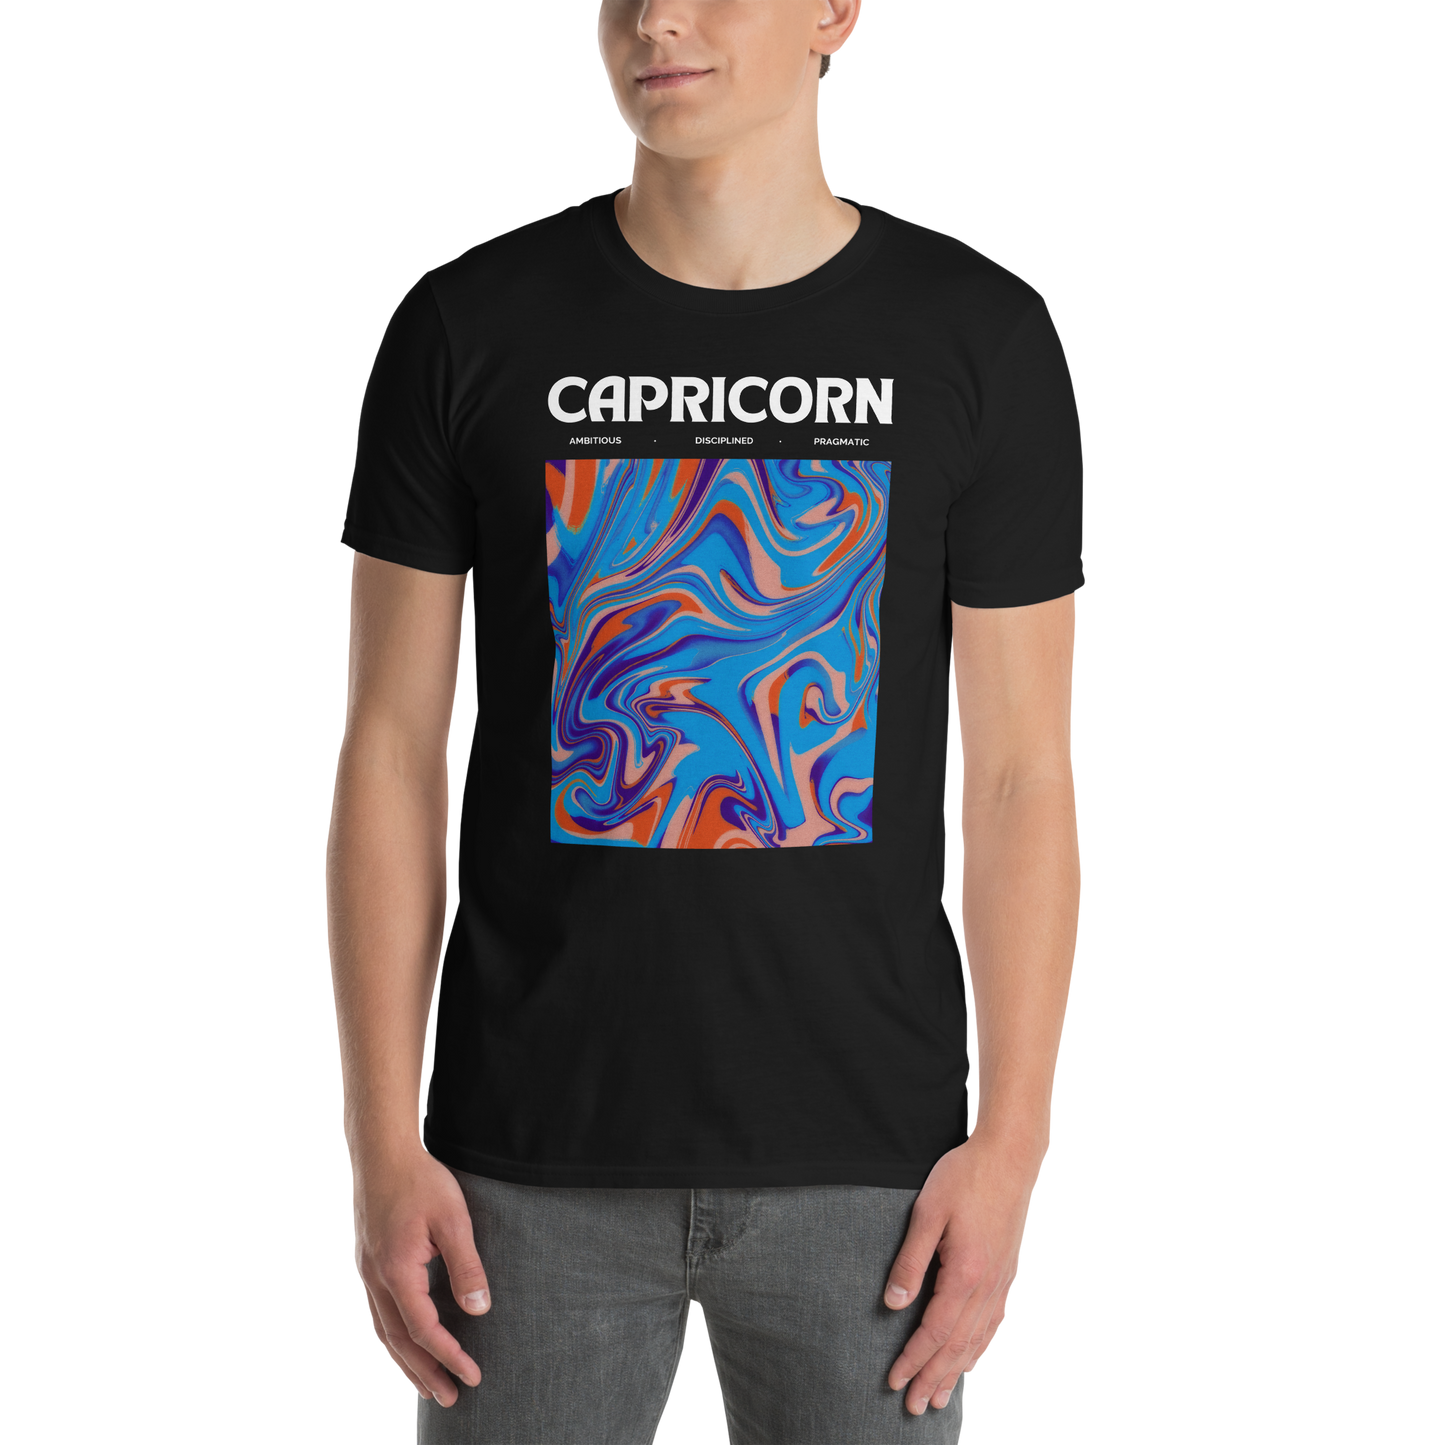 Man wearing a Black Capricorn T-Shirt featuring an Abstract Capricorn Star Sign graphic on the chest - Cool Graphic Zodiac T-Shirts - Boozy Fox